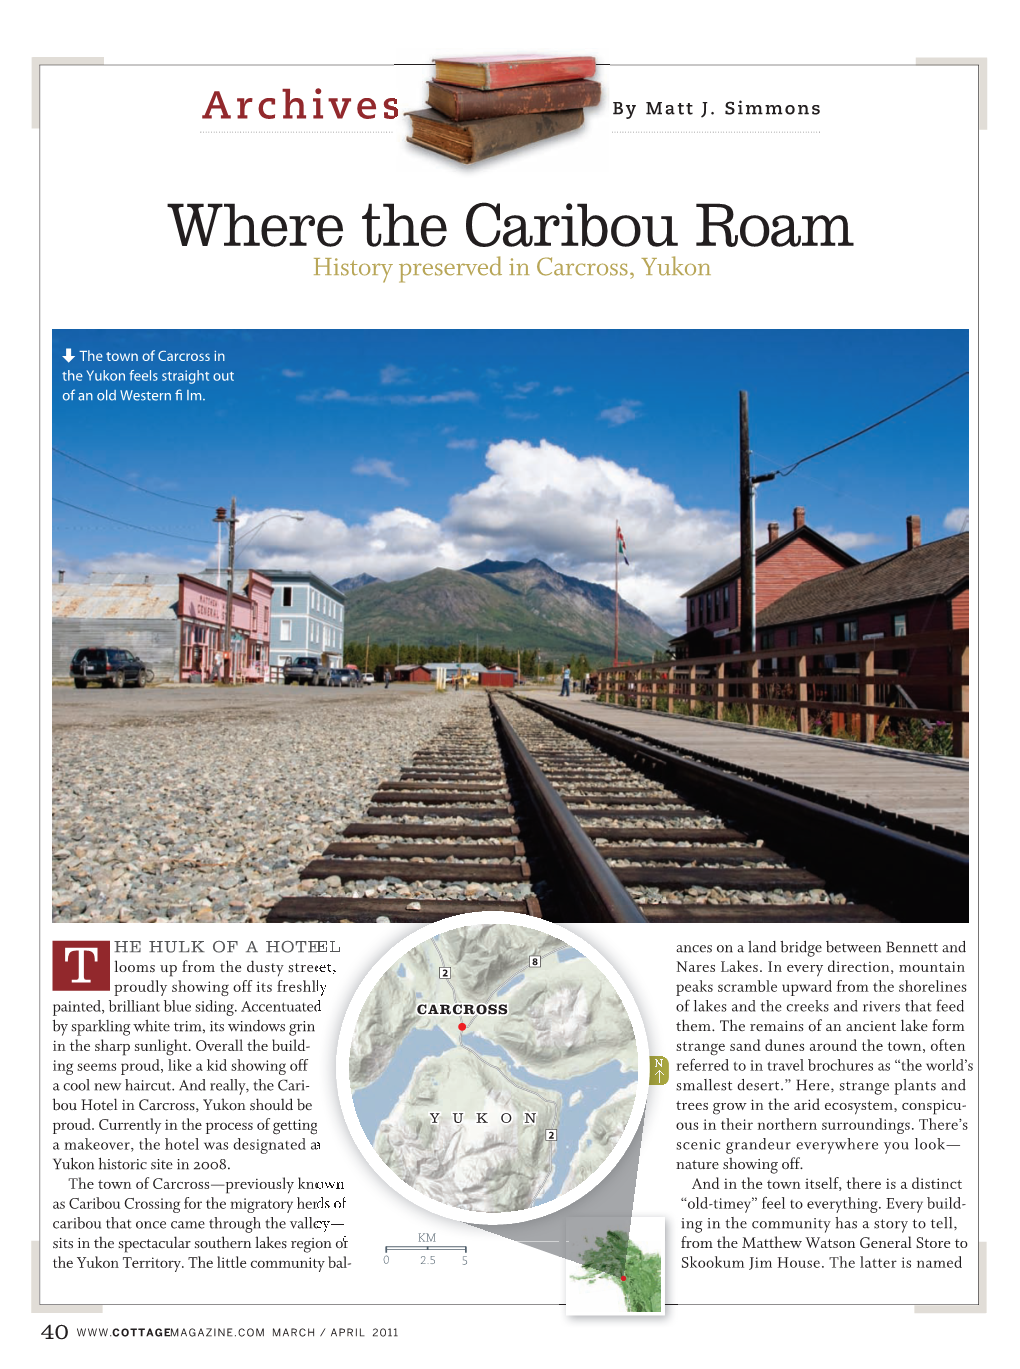 Where the Caribou Roam History Preserved in Carcross, Yukon